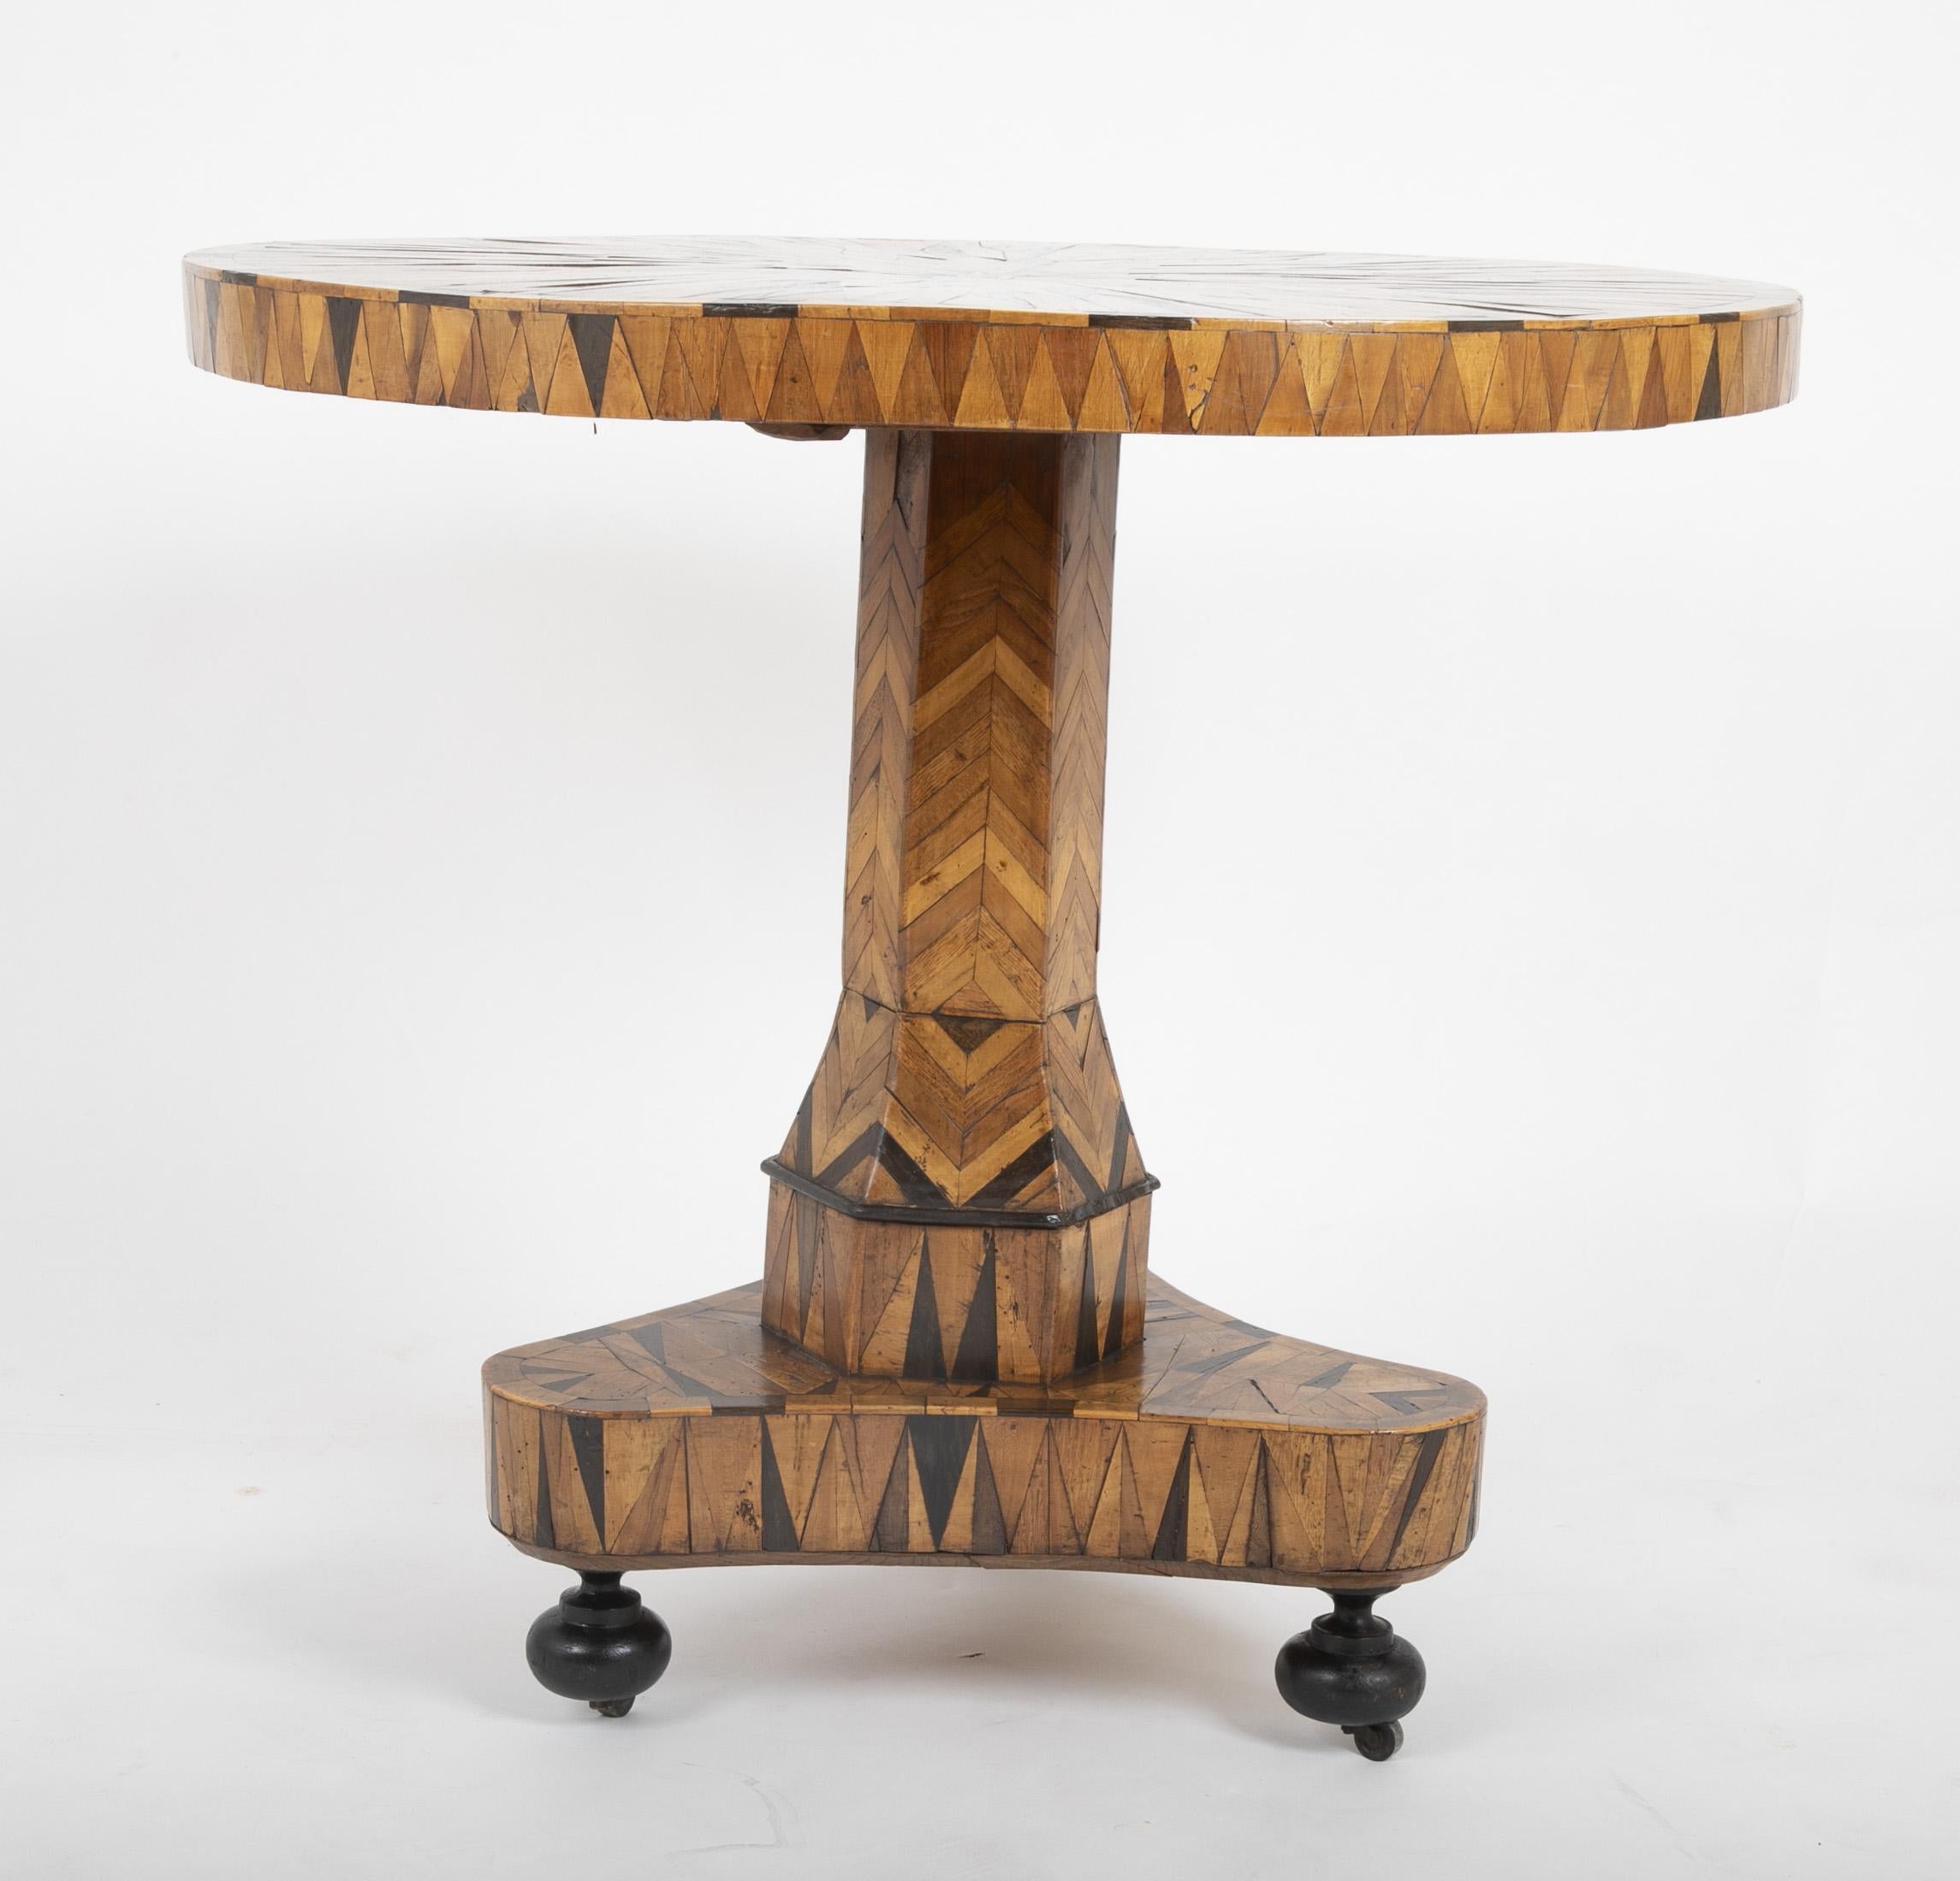 Baroque Early 19th Century Continental Parquetry Center Table